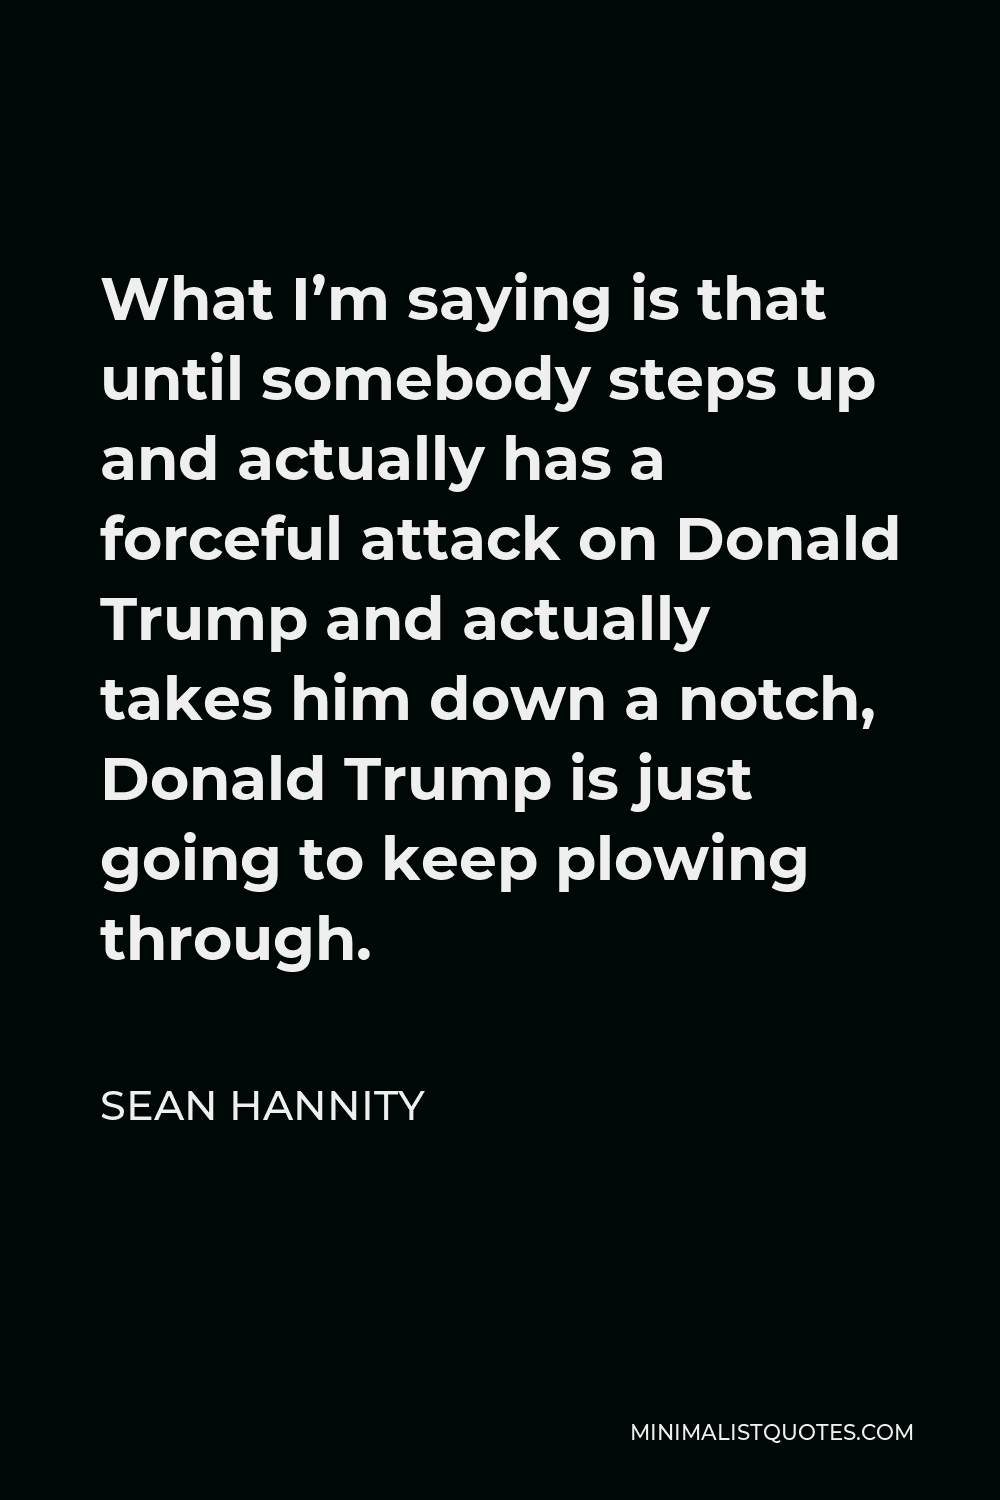 Sean Hannity Quote - What I’m saying is that until somebody steps up and actually has a forceful attack on Donald Trump and actually takes him down a notch, Donald Trump is just going to keep plowing through.